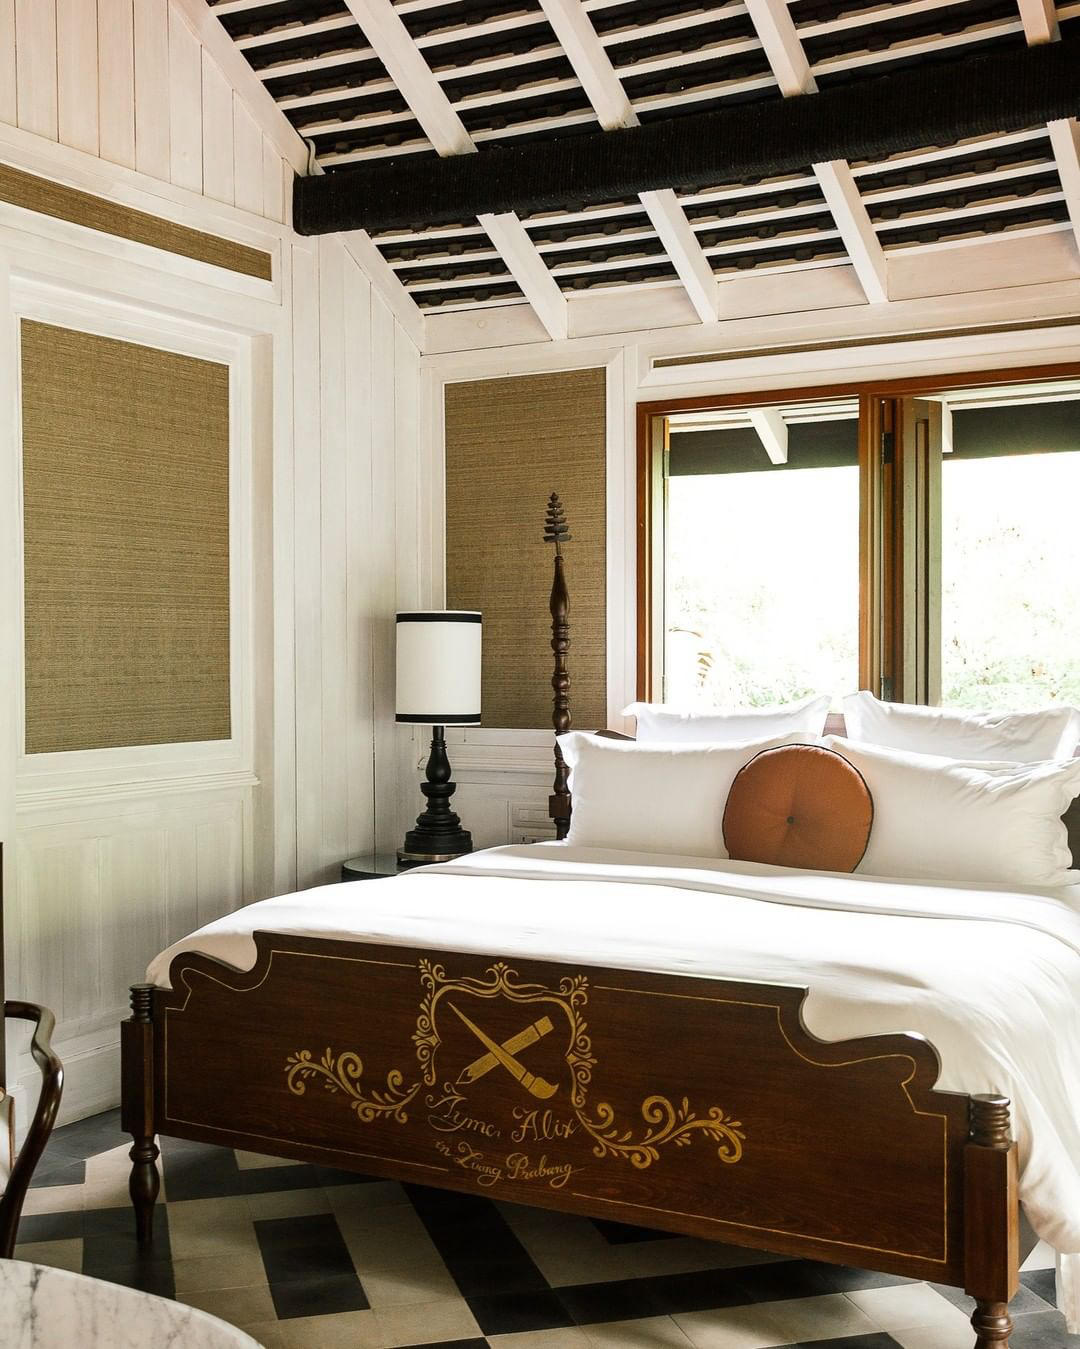 Rosewood Luang Prabang - Fall asleep in our luxurious accommodation with the noise of water and awak